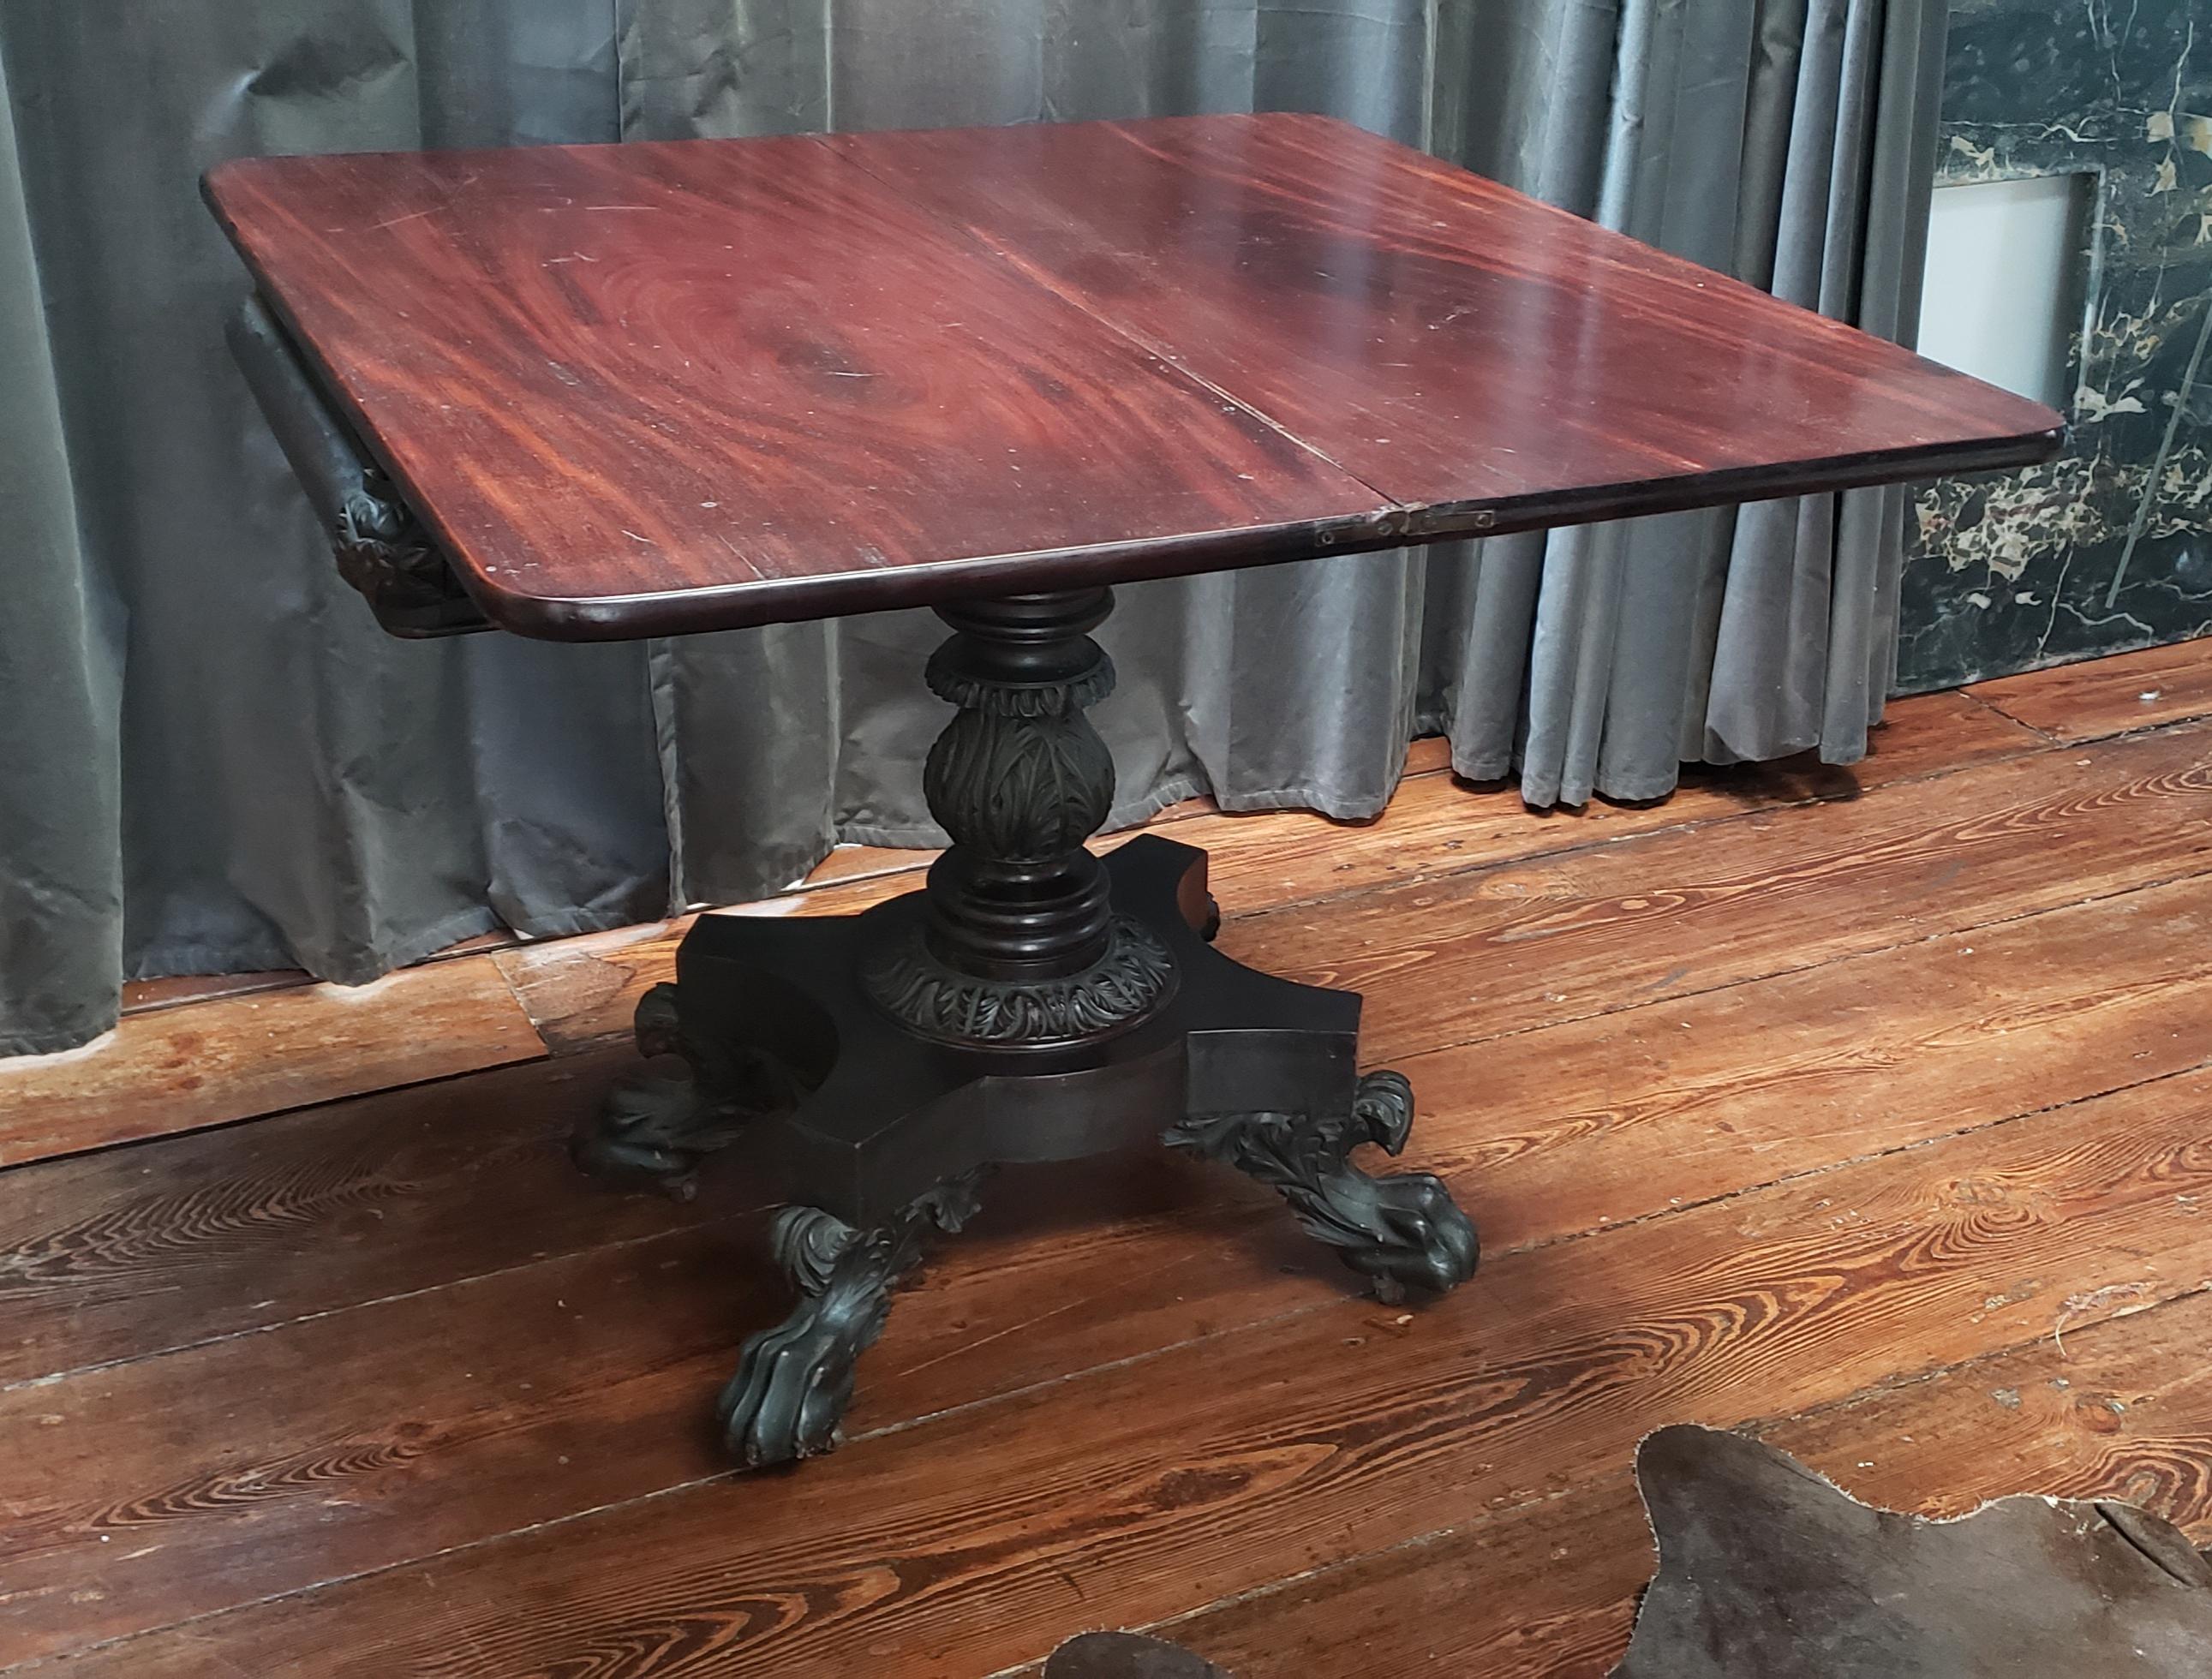 American federal games table in carved mahogany. Flip top with concertina movement. Attributed to the workshop of Philadelphia cabinet maker, Anthony Quervelle, circa 1825. Retains original / old finish and patina.